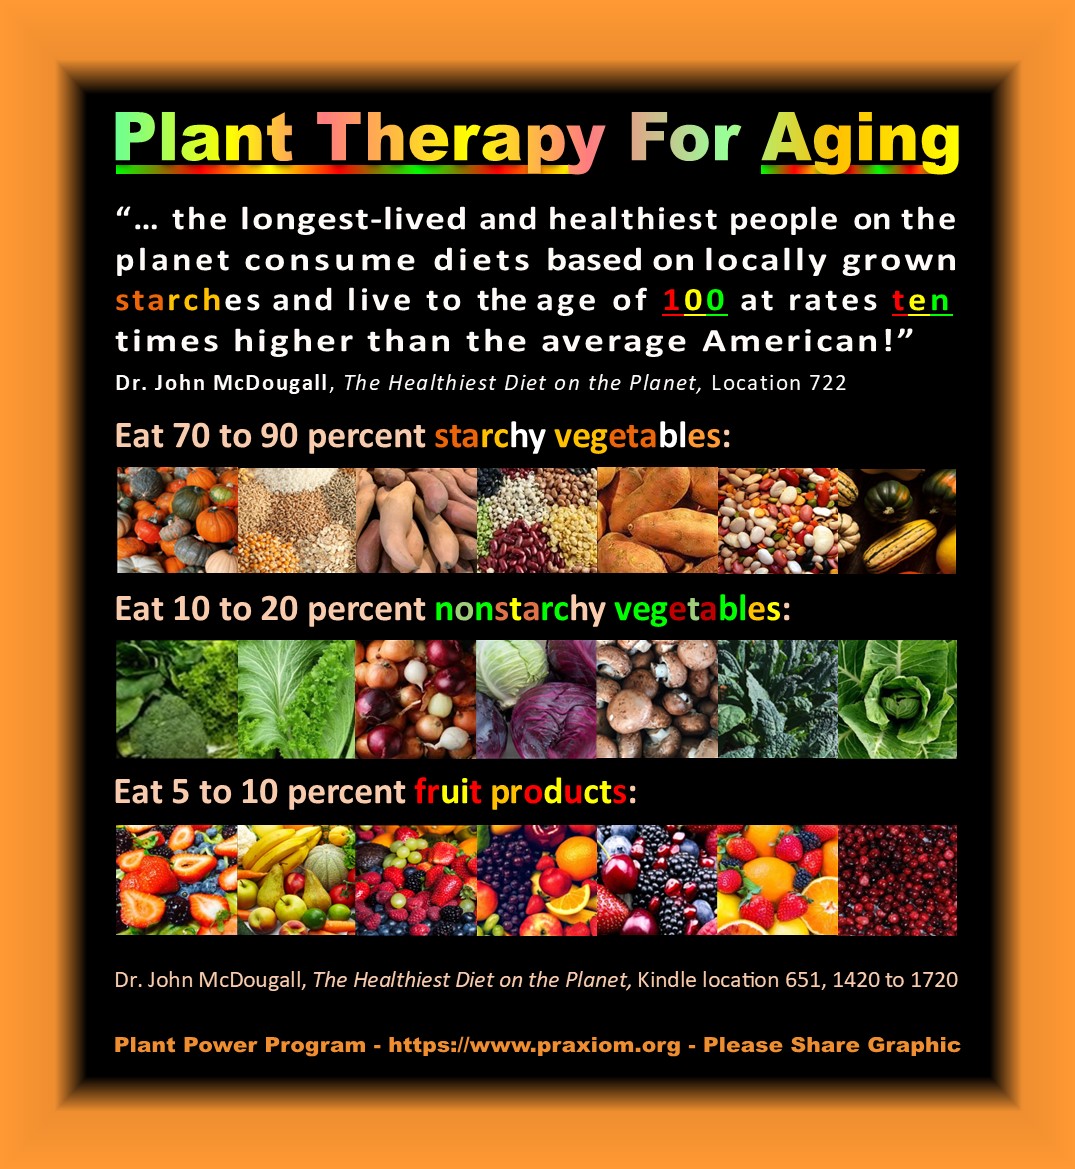 Plant Therapy for Aging - Dr. John McDougall